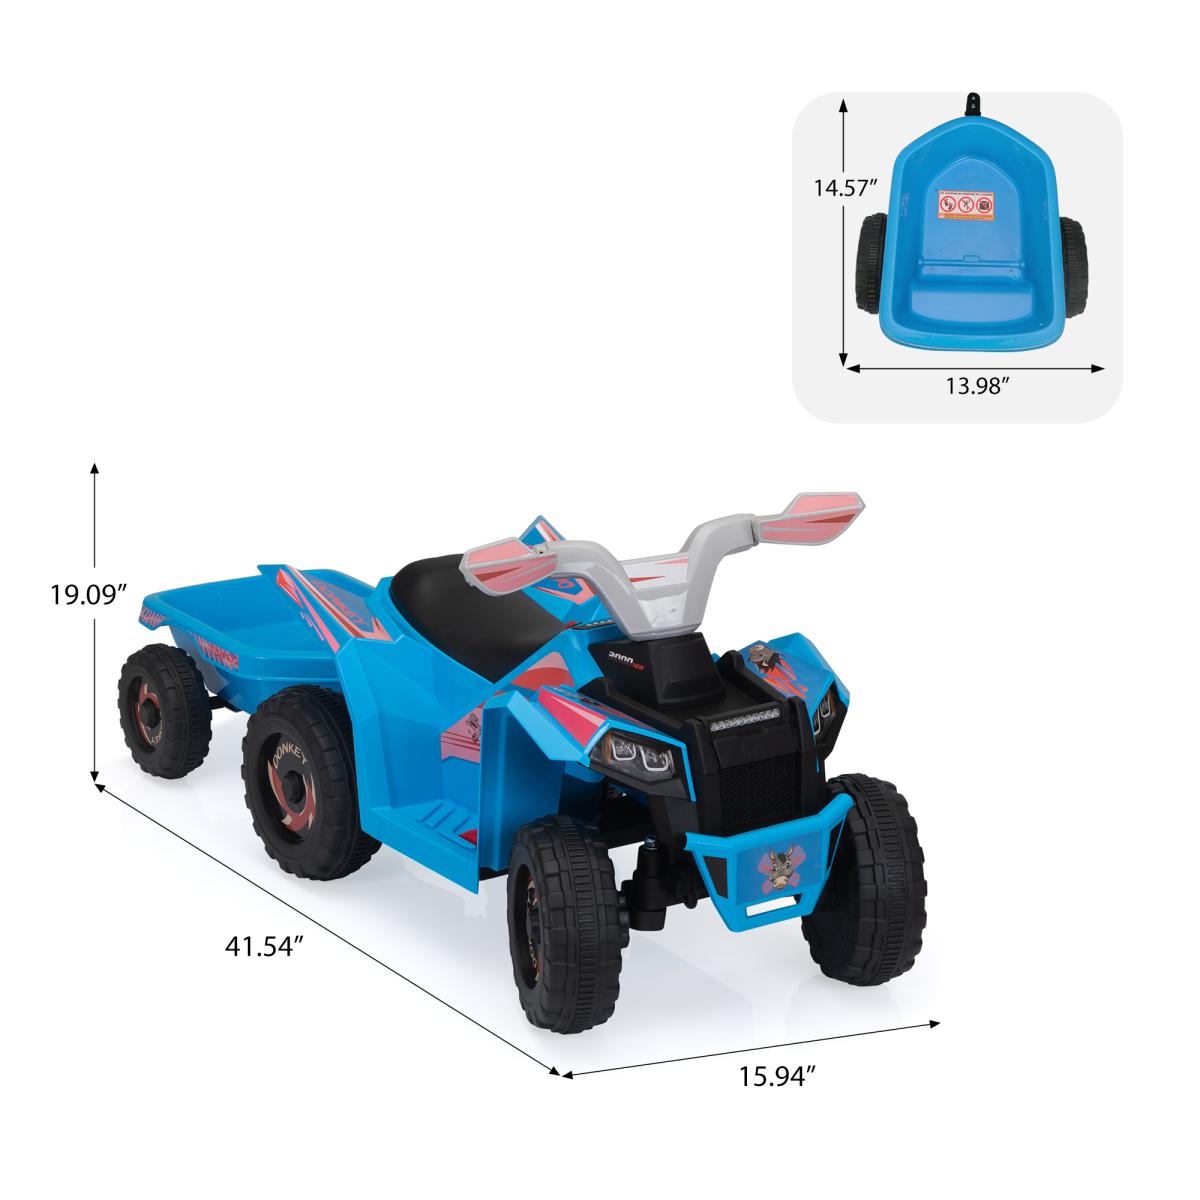 6V Kids Electric Atv, Toddler Ride on Car with Trailer, Music, Bluetooth and Power Display for Boys and Girls, Blue